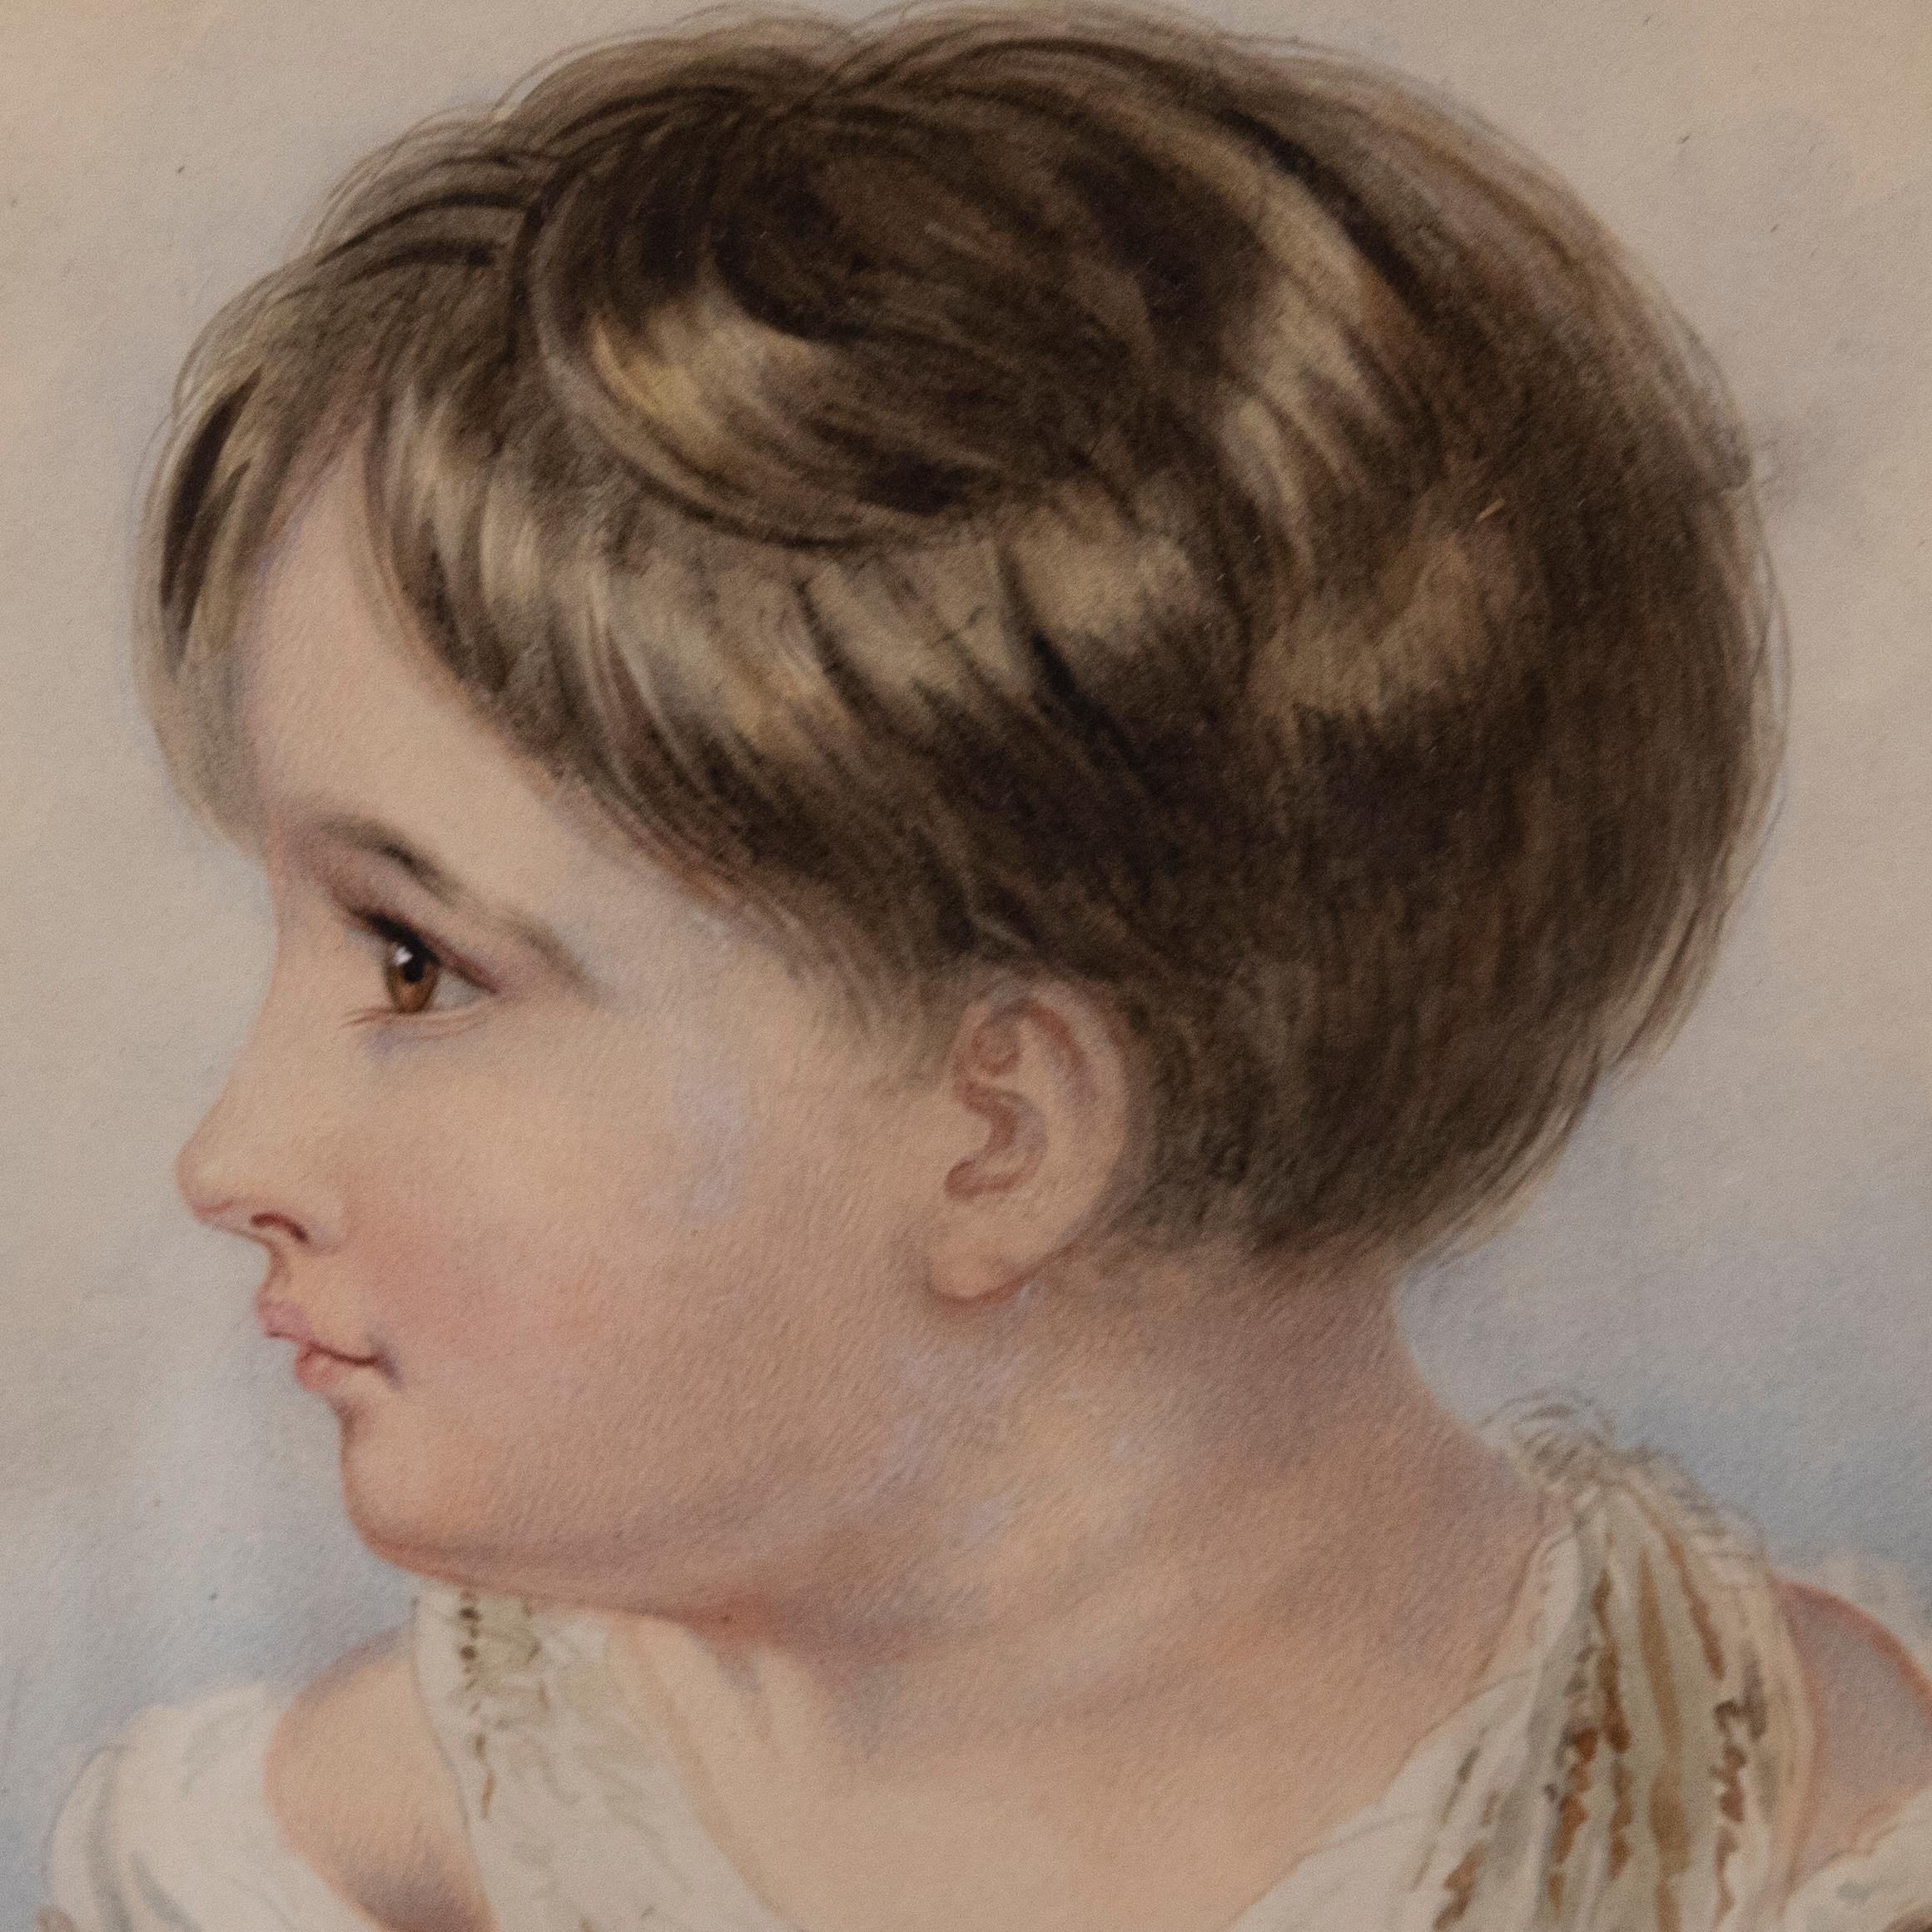 Mid 19th Century Watercolour - The Angelic Child For Sale 1